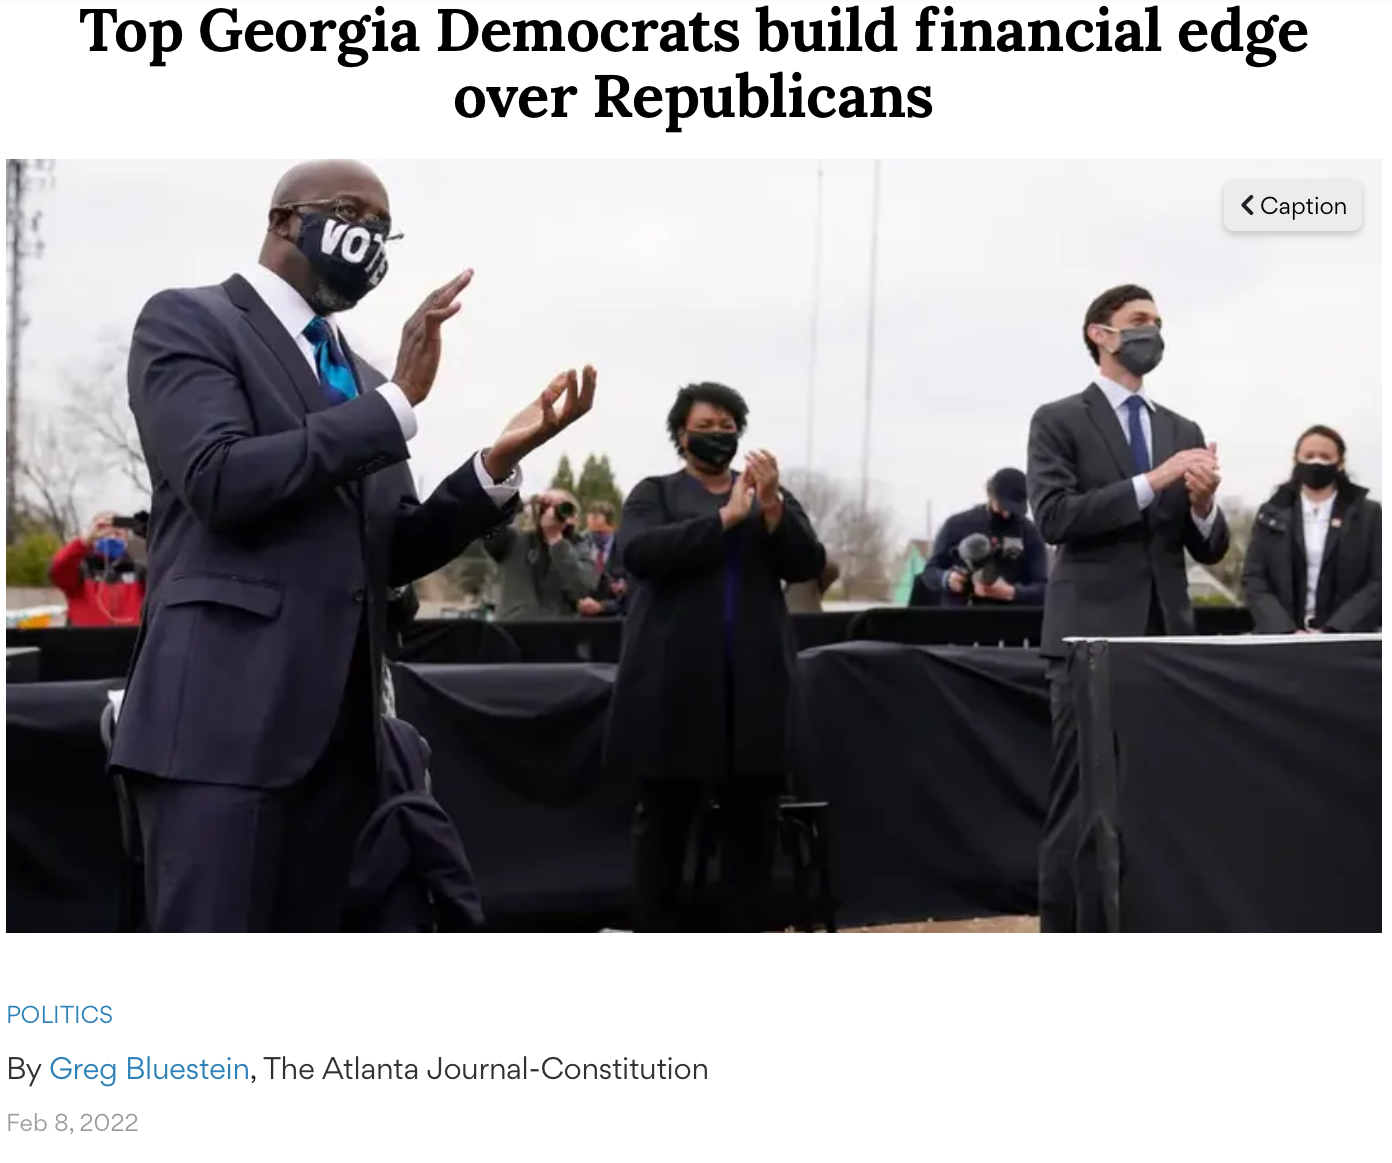 Georgia democrats, Stacey Abrams & Raphael Warnock, overwhelmingly funded from money outside Georgia